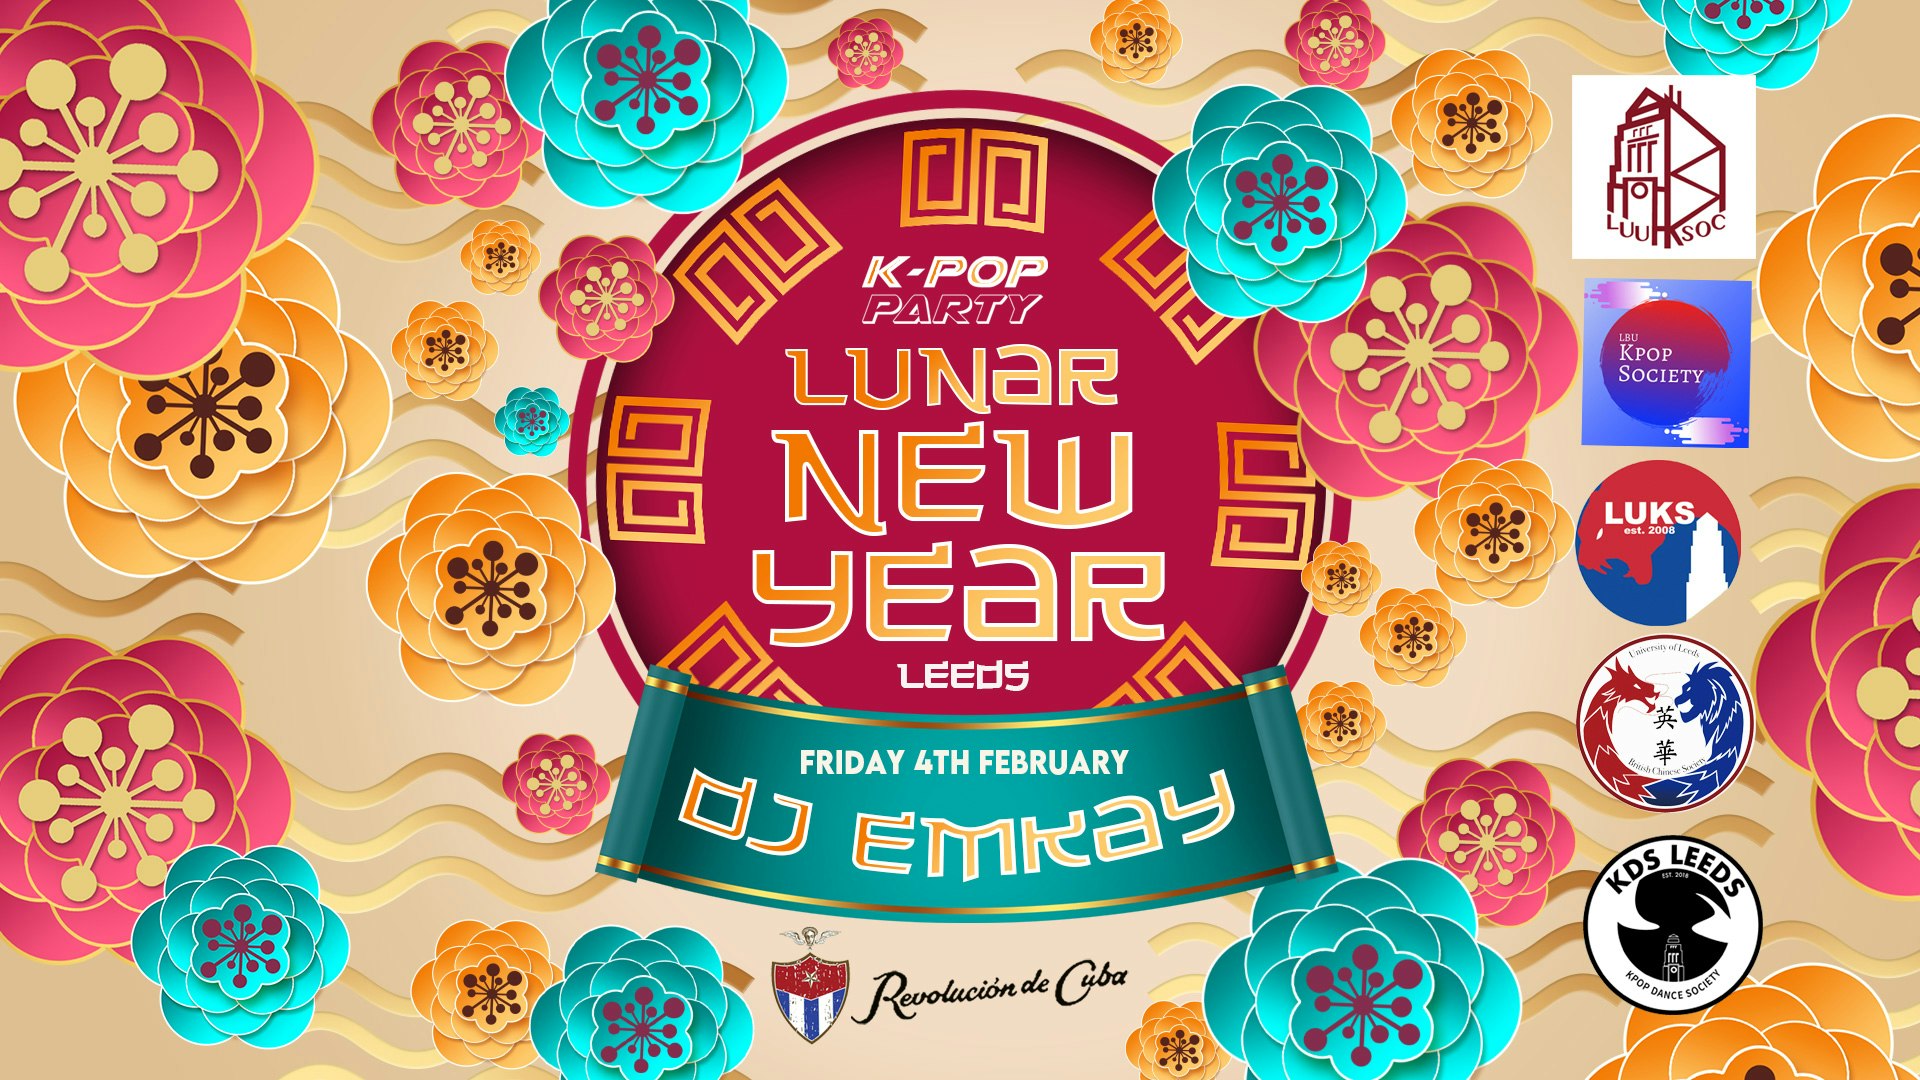 K-Pop Party Leeds | LUNAR NEW YEAR with DJ EMKAY | Friday 4th February